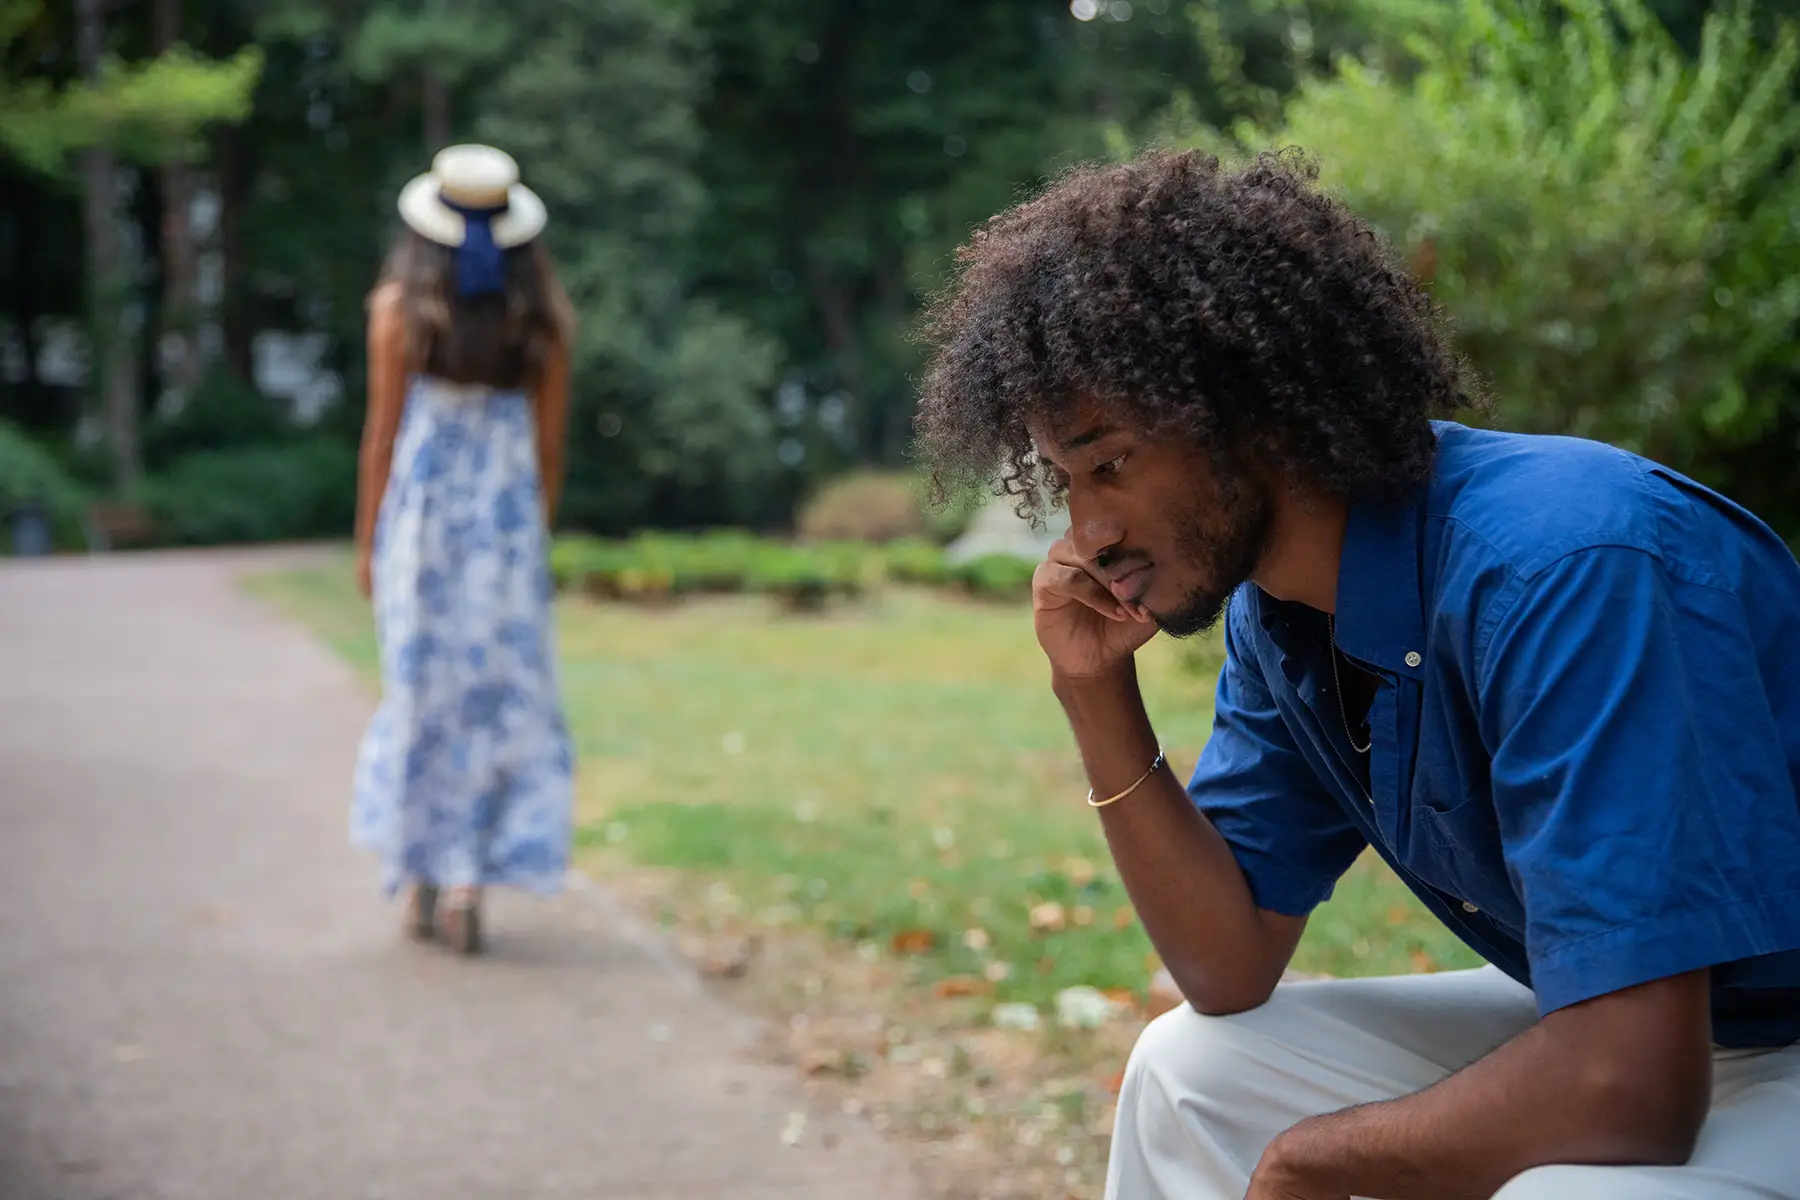 A sad man sits on a bench in the foreground. Out of focus, in the background, a woman in a long dress and hat walks away.